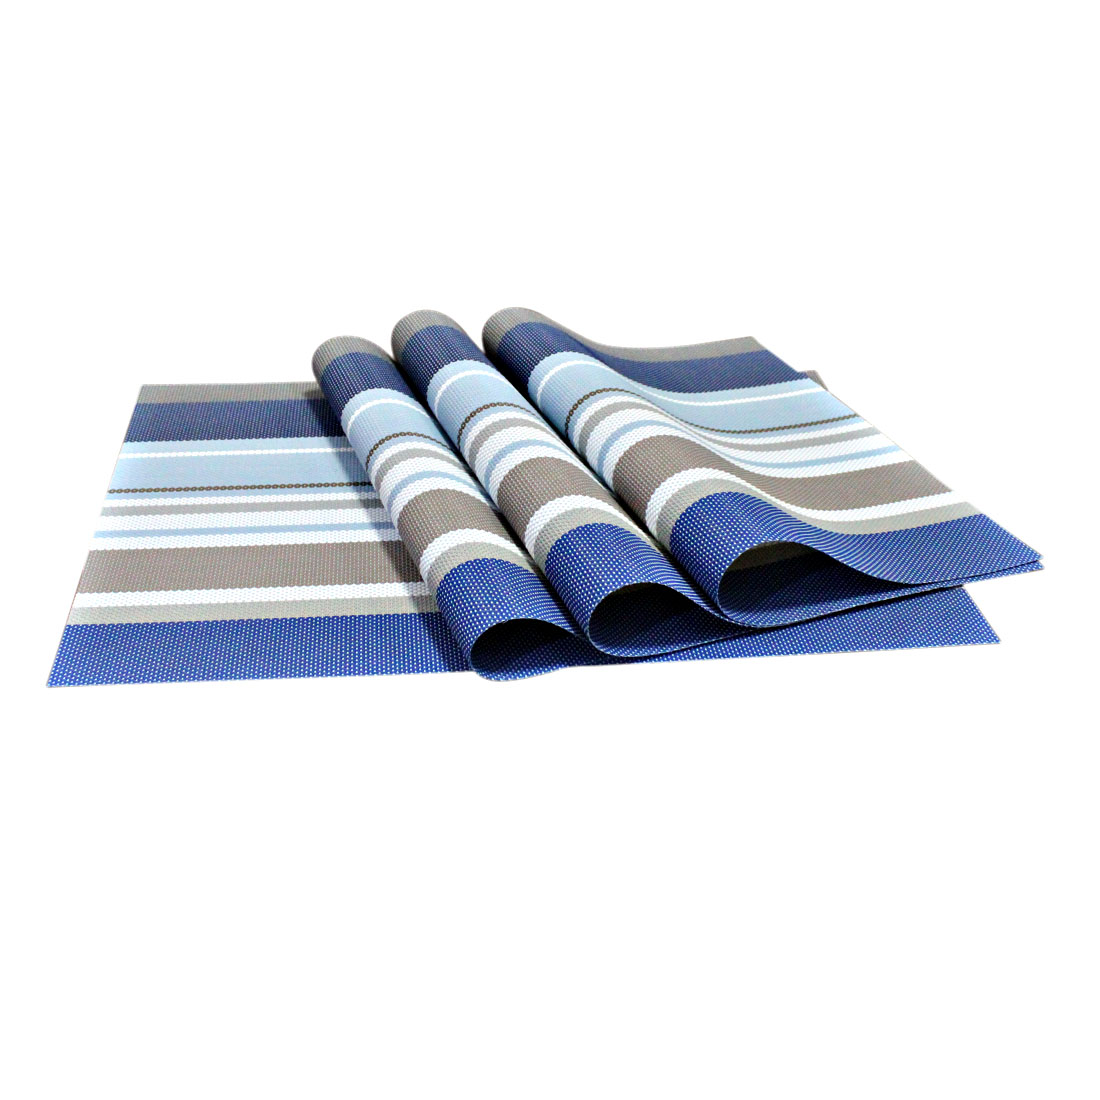 ORKA PVC Dining Table Placemat 4-Piece Set Blue  